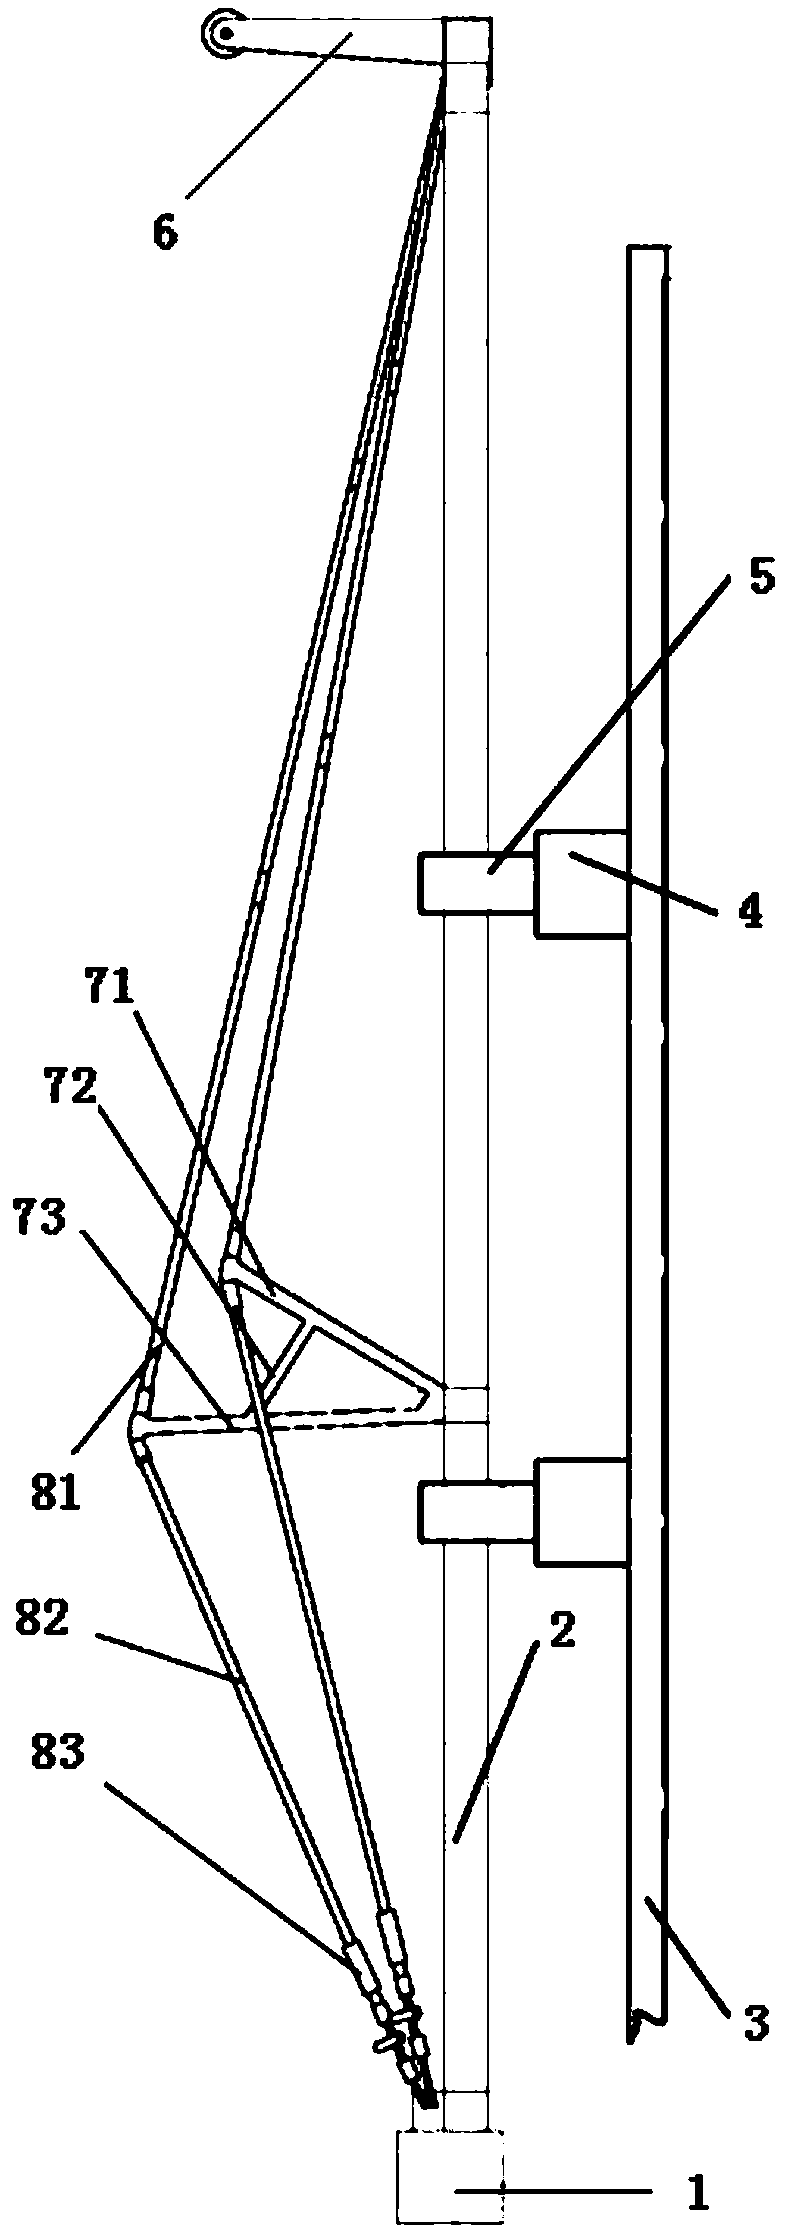 Electric hoisting embracing pole for building electric transmission line towers in groups